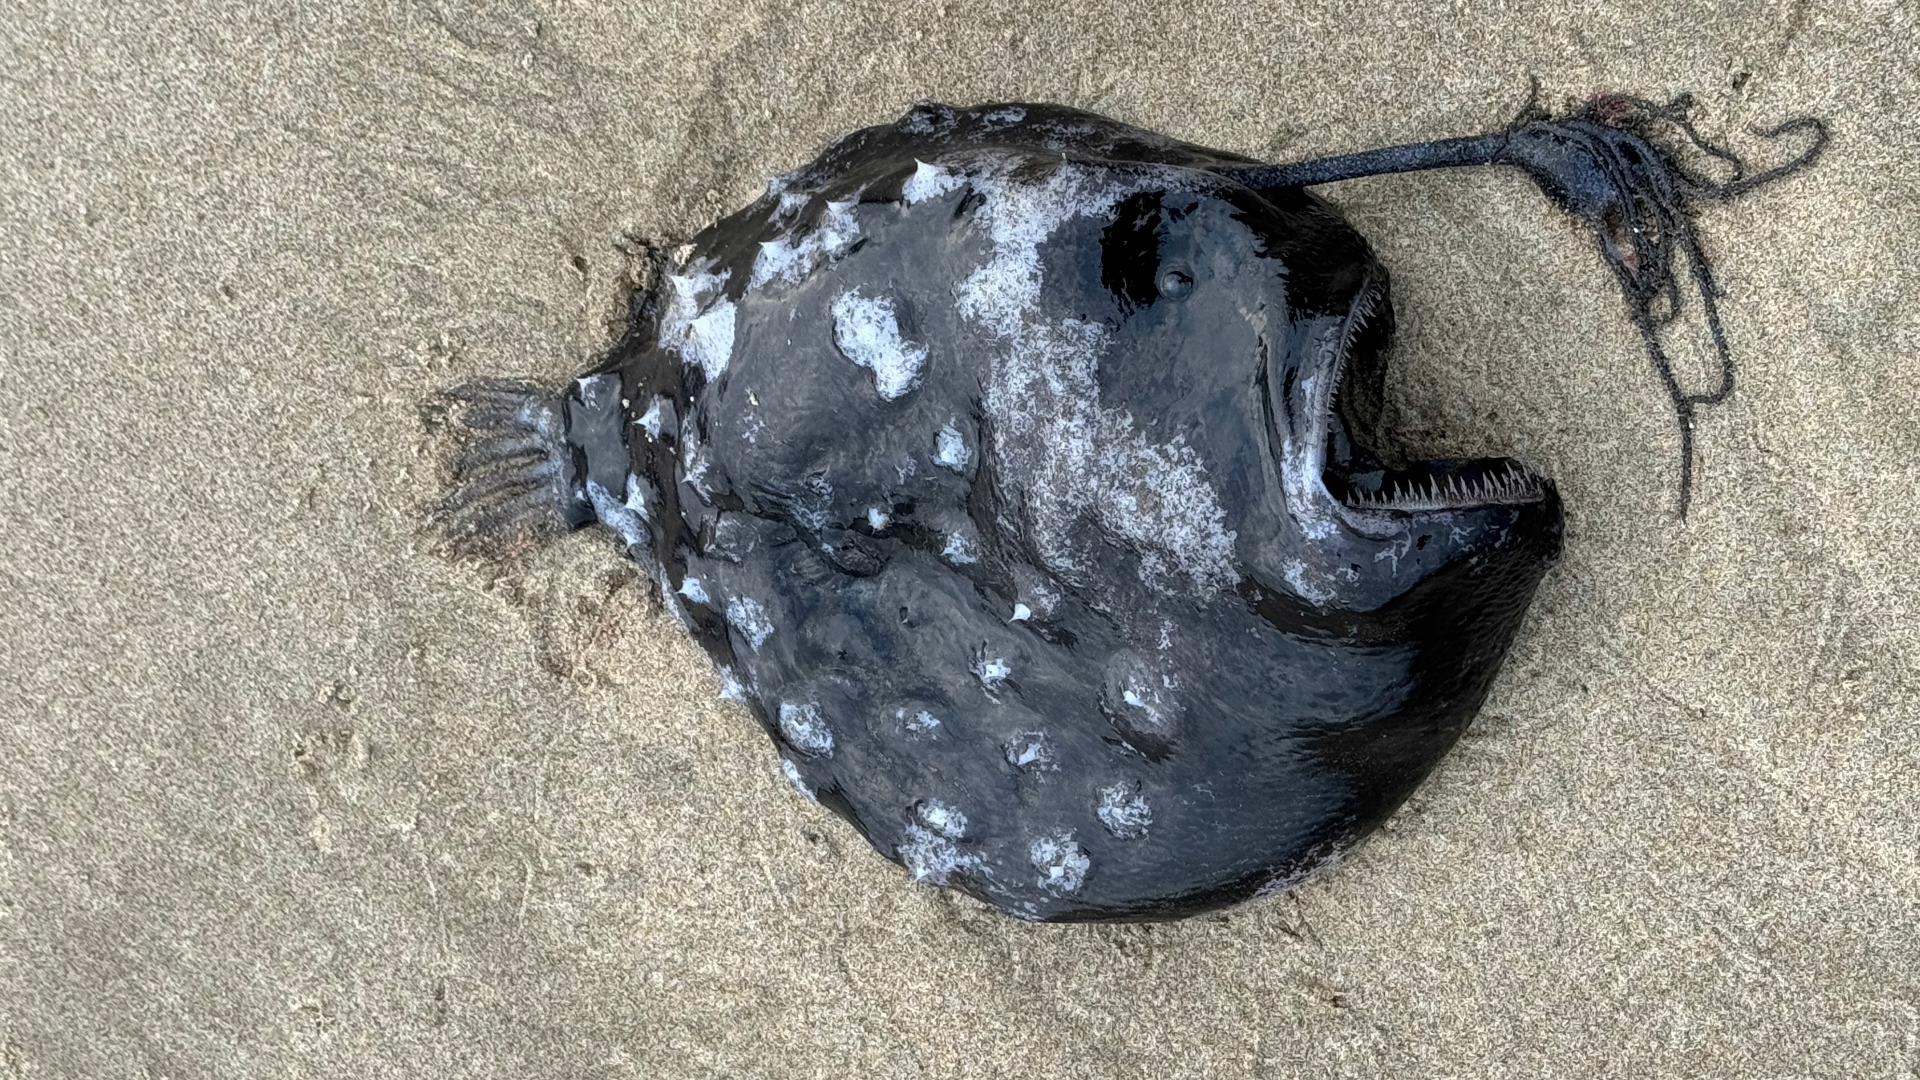 Beachgoers were surprised by a creature south of Cannon Beach. Seaside Aquarium said it's their first known deep-sea angler fish reported on the Oregon Coast.